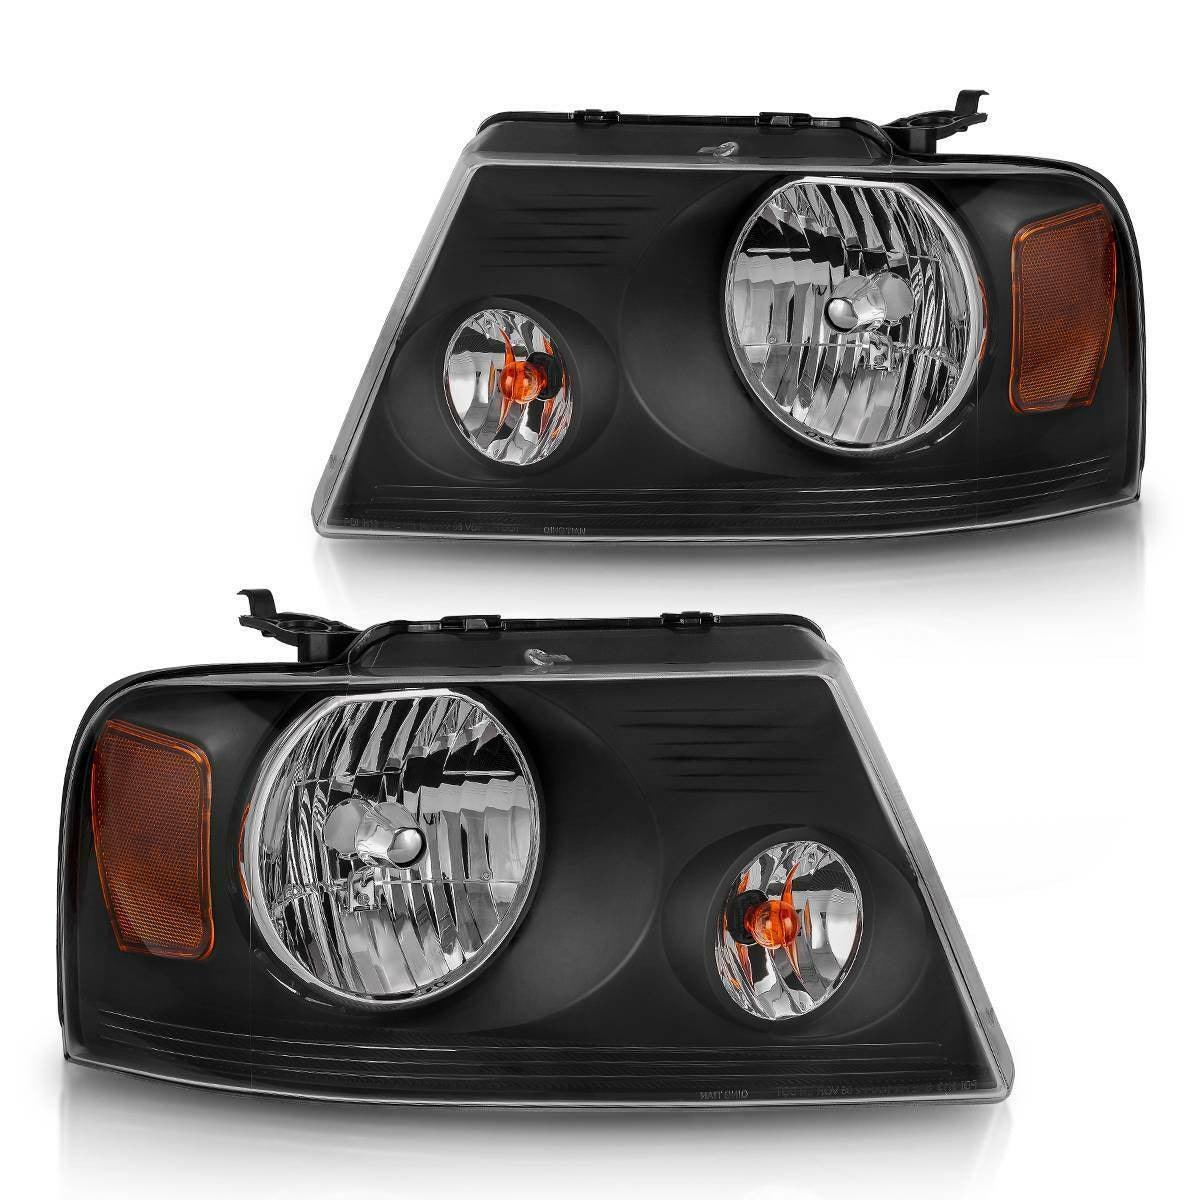 ADCARLIGHTS Headlight Assembly Compatible with Ford F150 2004-2008 2006-2008 Lincoln Mark LT Black Housing Amber Reflector Driver and Passenger Side 